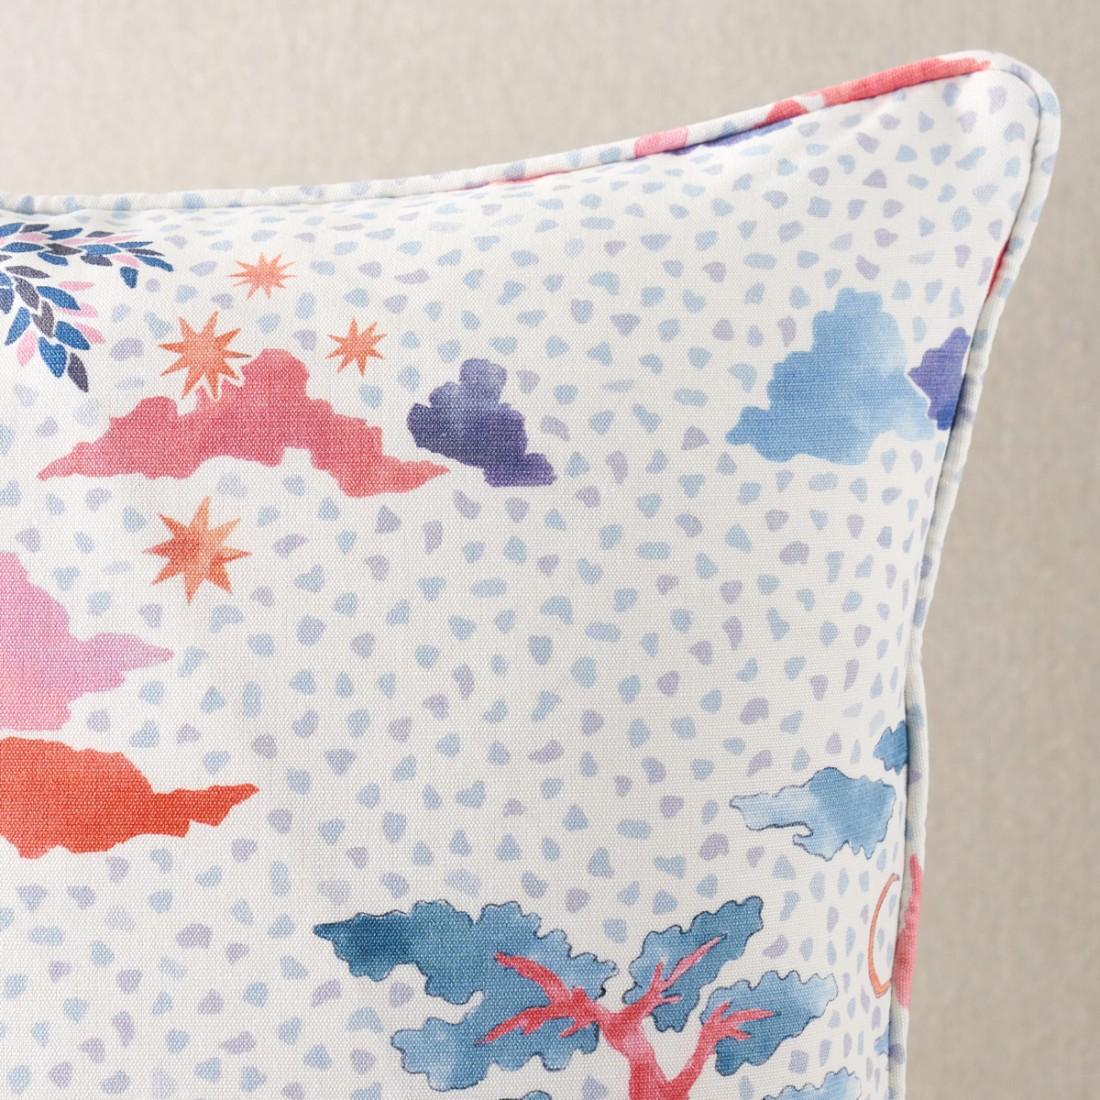 This pillow features Valetta by Happy Menocal for Schumacher with a self-welt finish. Inspired by the ancient capital of Malta, Valetta evokes the romance of a distant land with its exotic trees and celestial bodies floating on a stippled oceanic